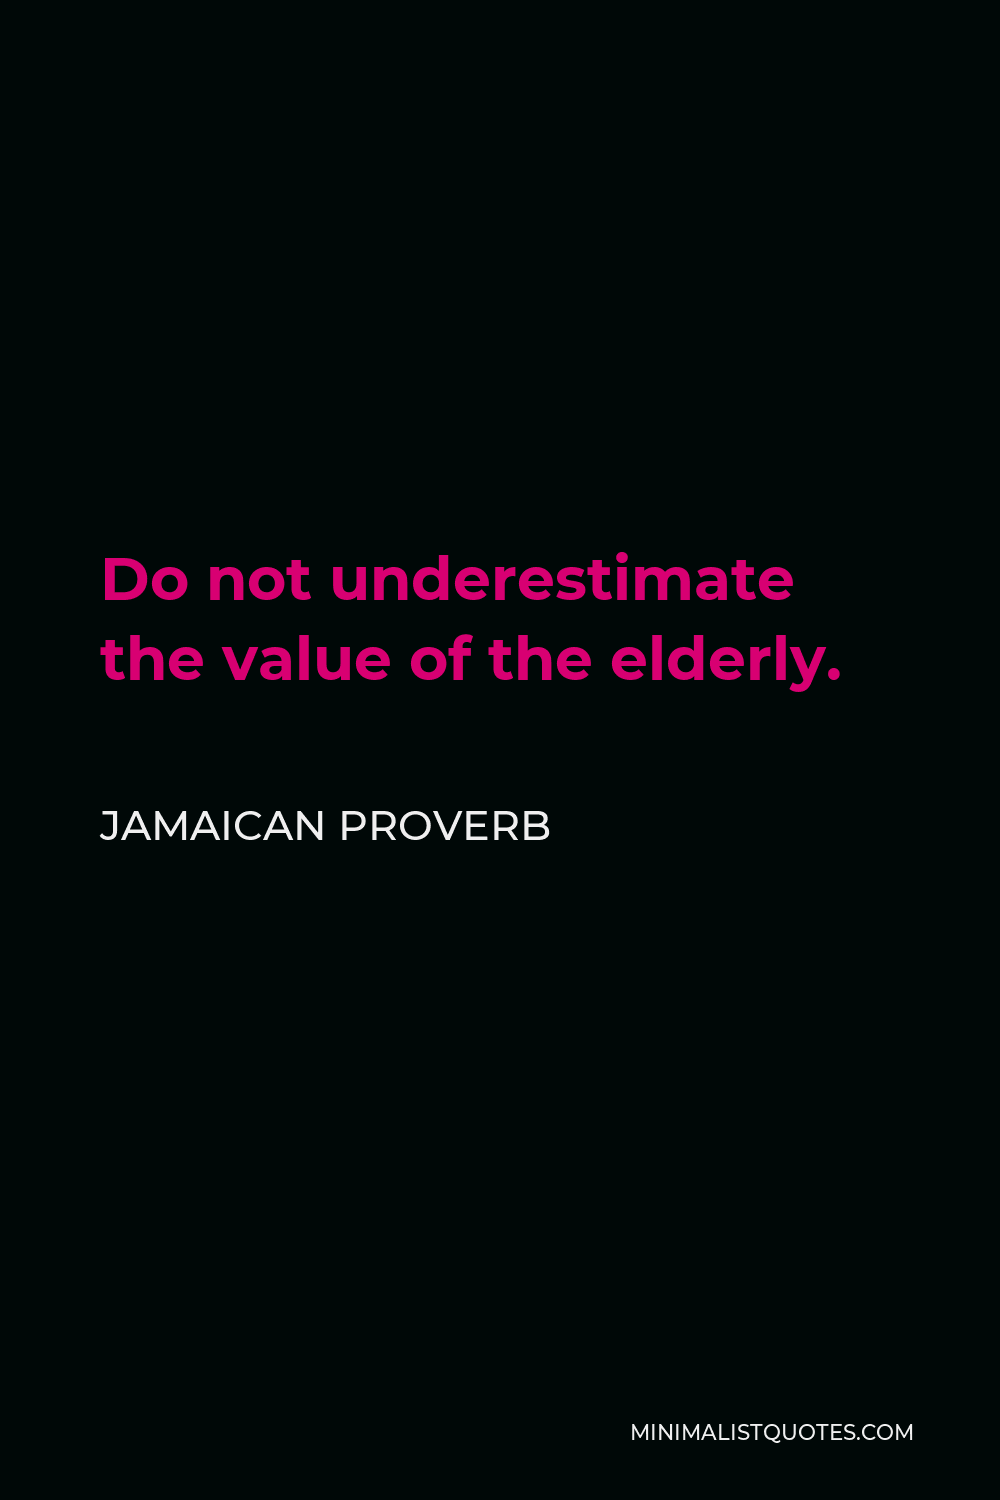 Jamaican Proverb Quote - Do not underestimate the value of the elderly.